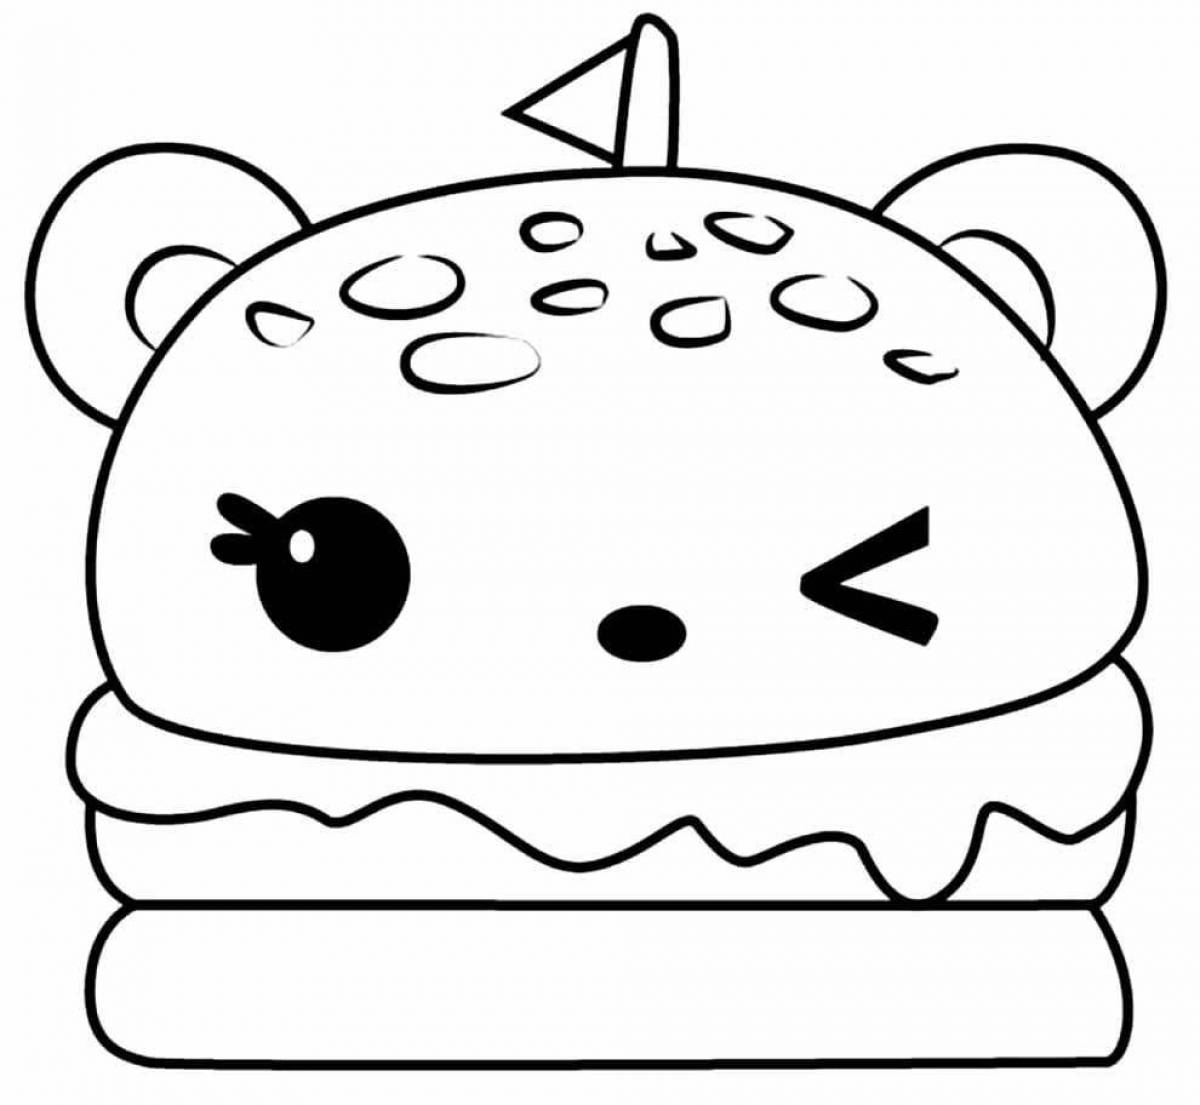 Coloured squishy coloring page